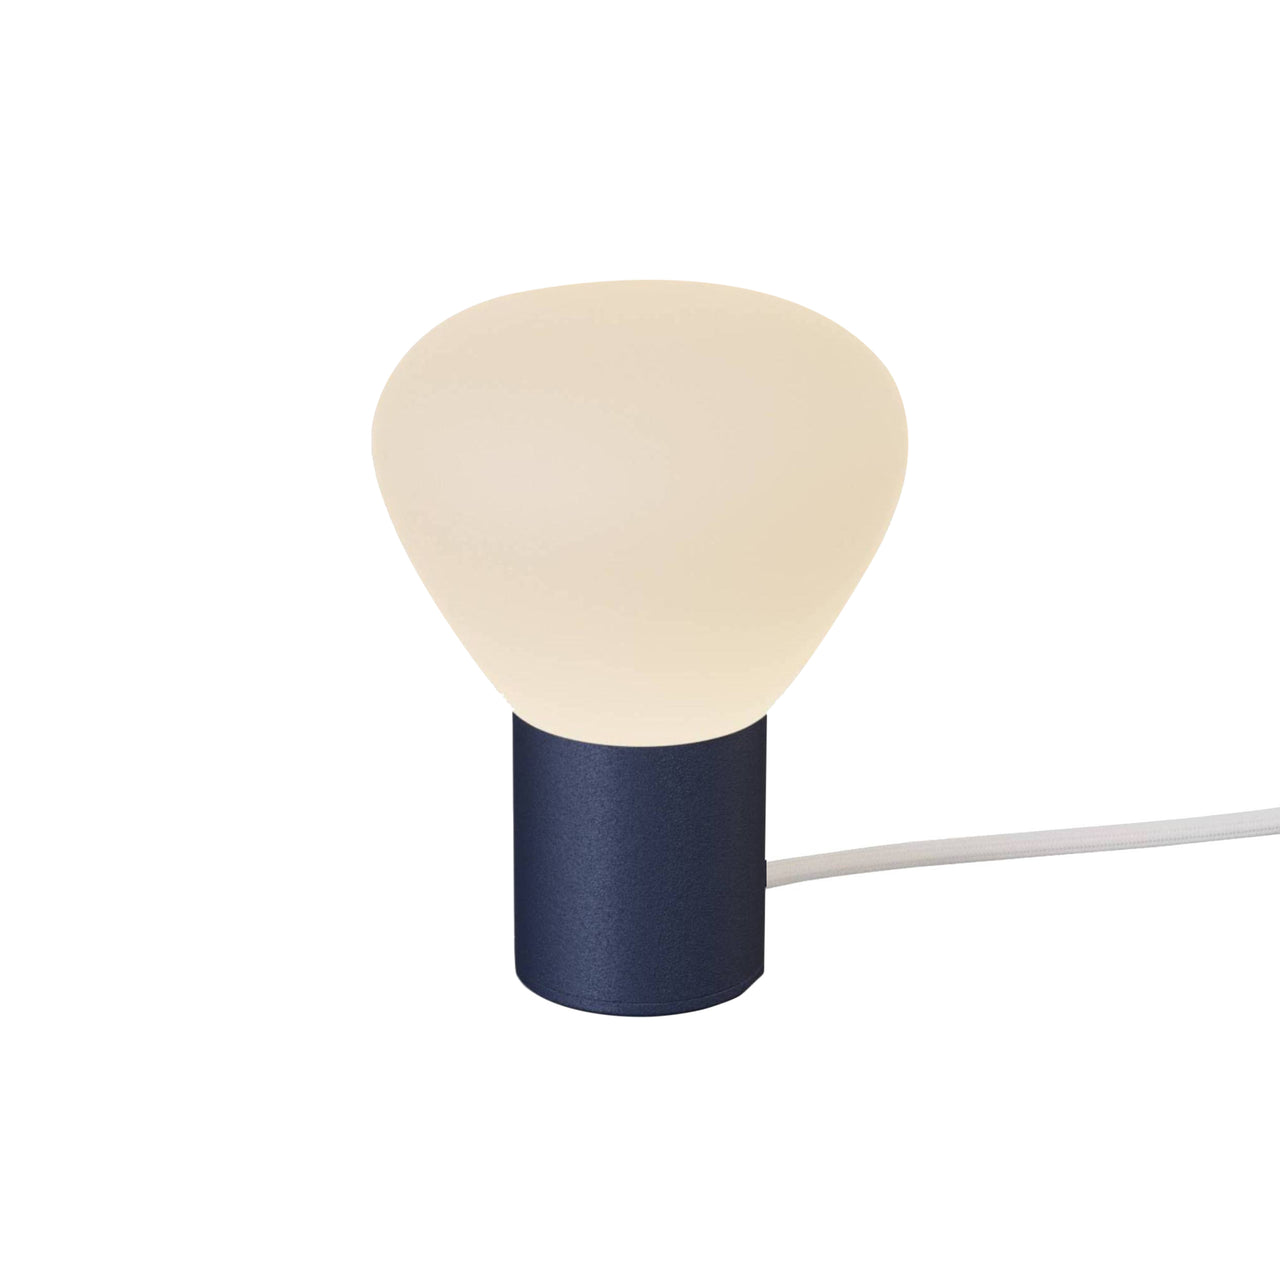 Parc 01 Table Lamp: Handswitch + Midnight Blue + White